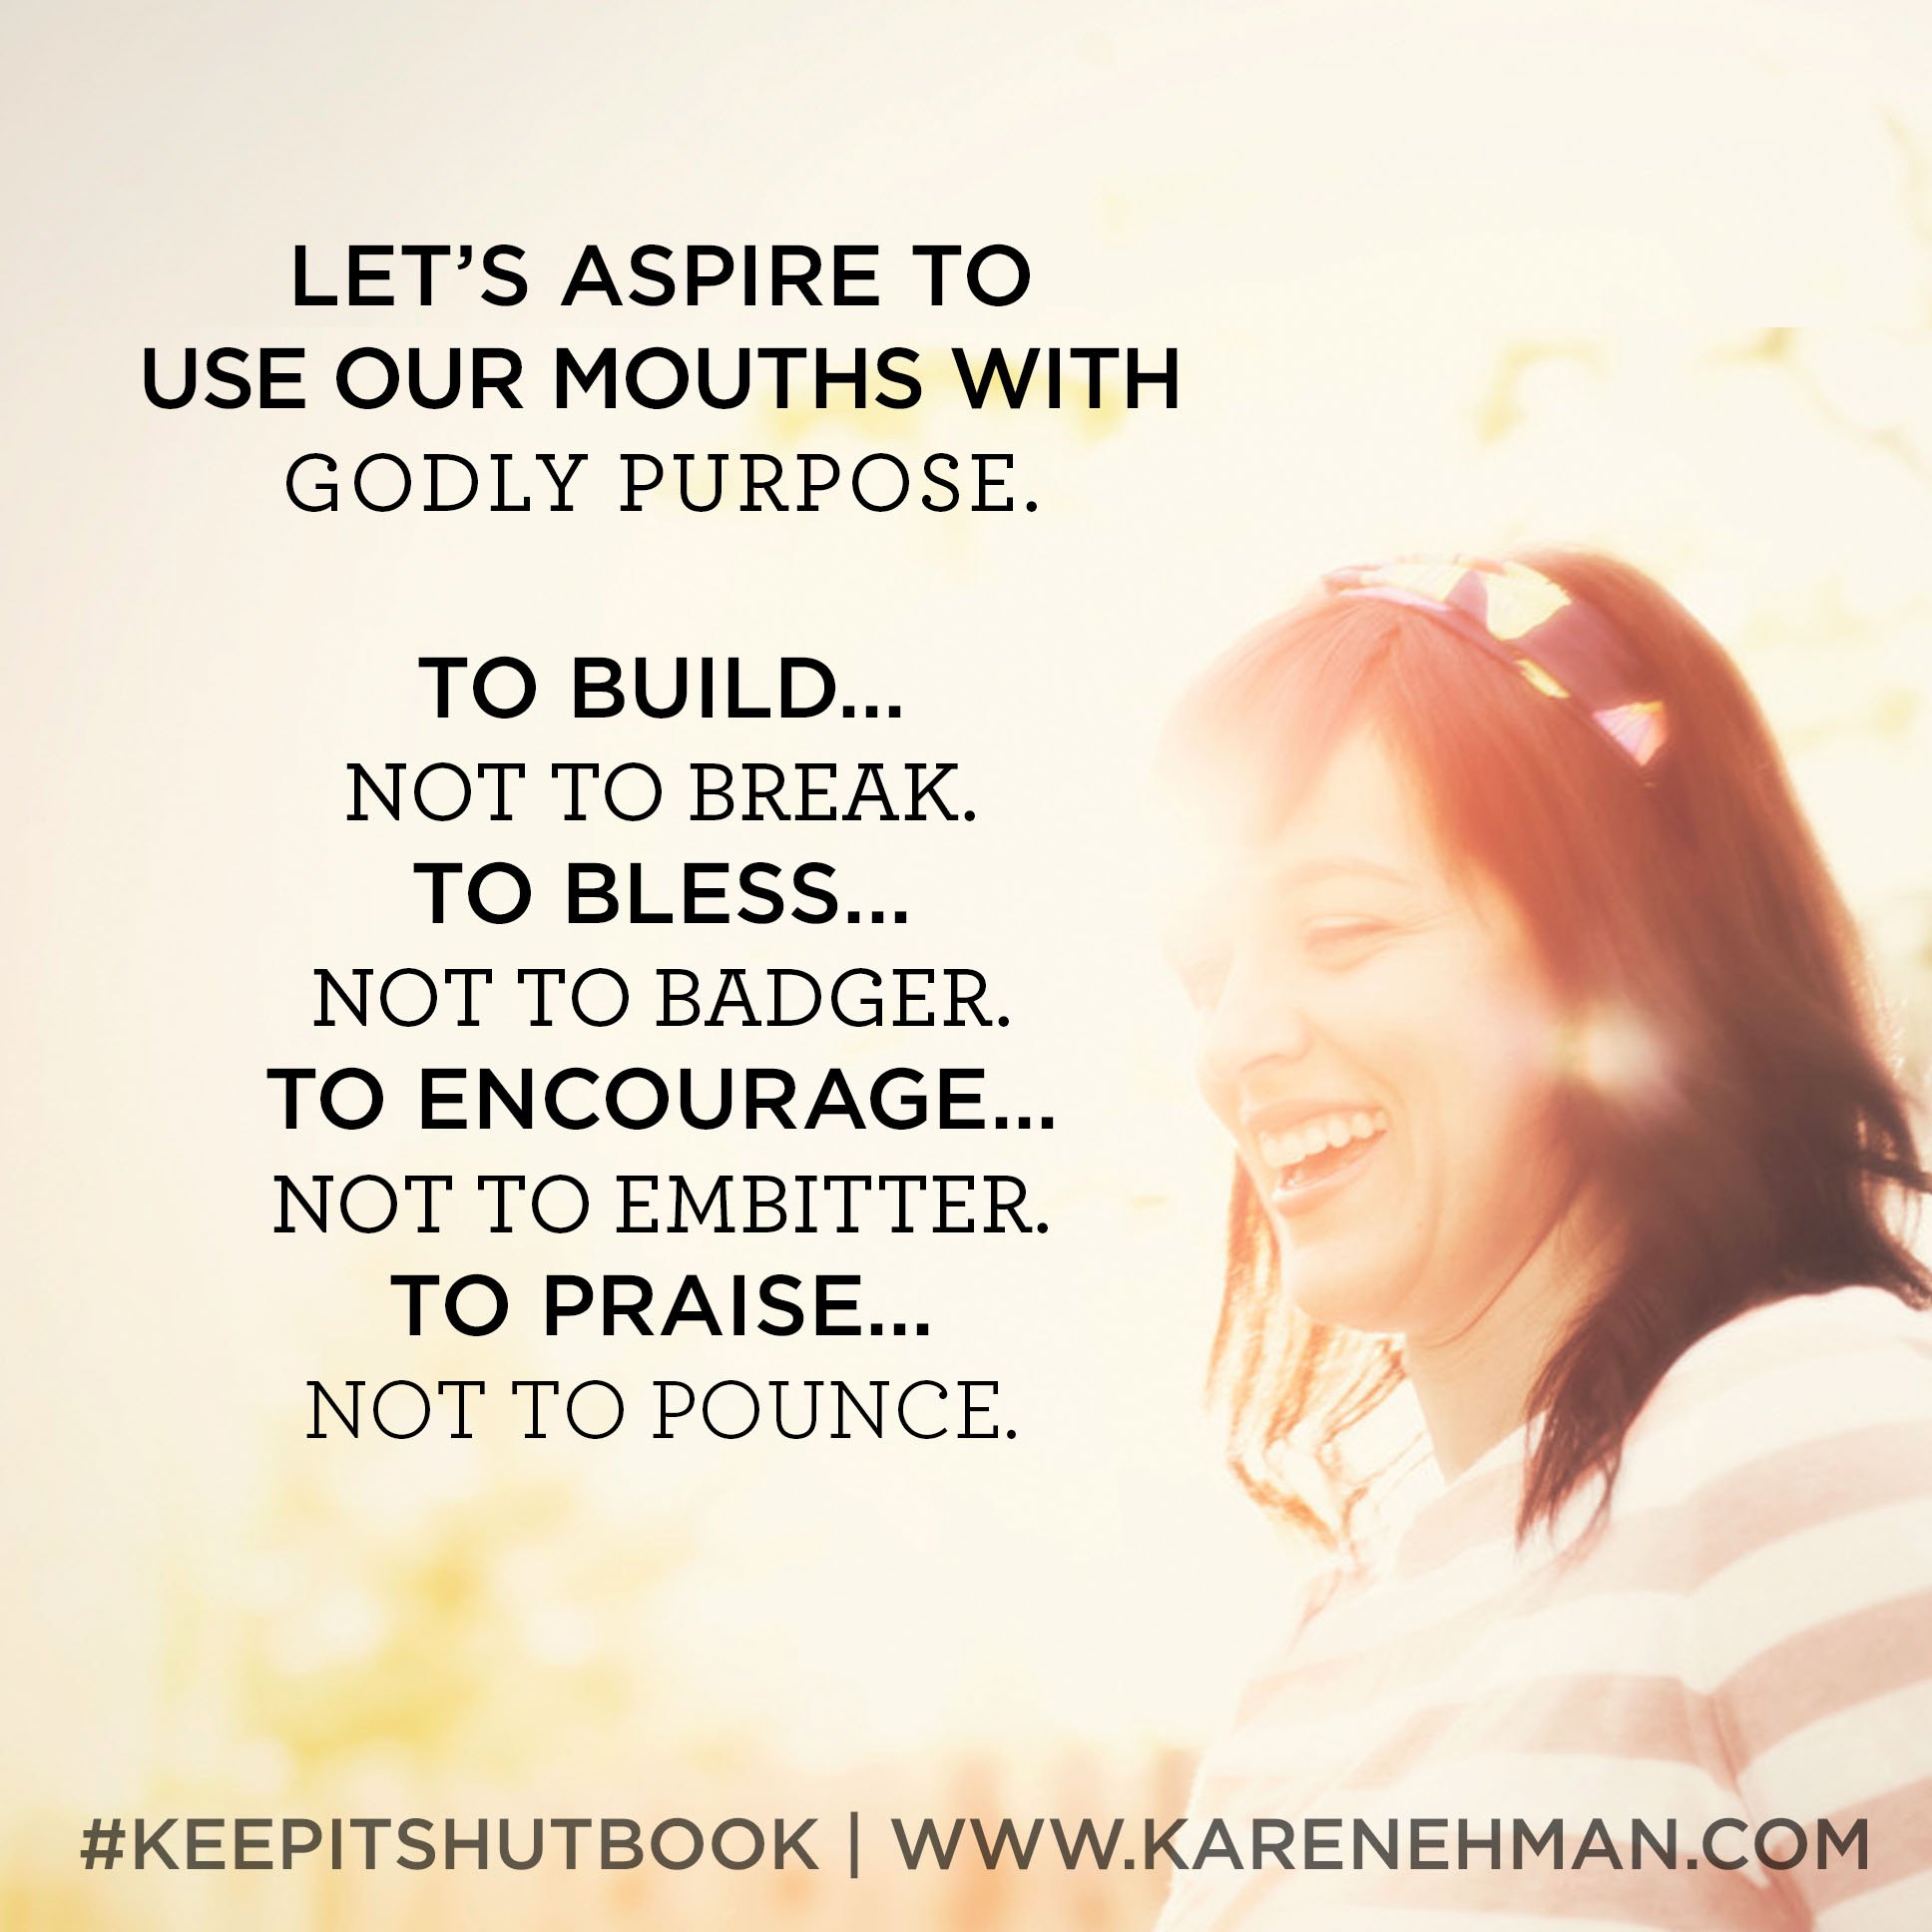 Mouth ever gotten you in a tangled up mess? Perhaps it is time to adopt a new rule of tongue. KEEP IT SHUT: What to Say, How to Say It & When to Say Nothing at All by Karen Ehman. There is also a 6-session video Bible study available for group or individual use. Check it out!